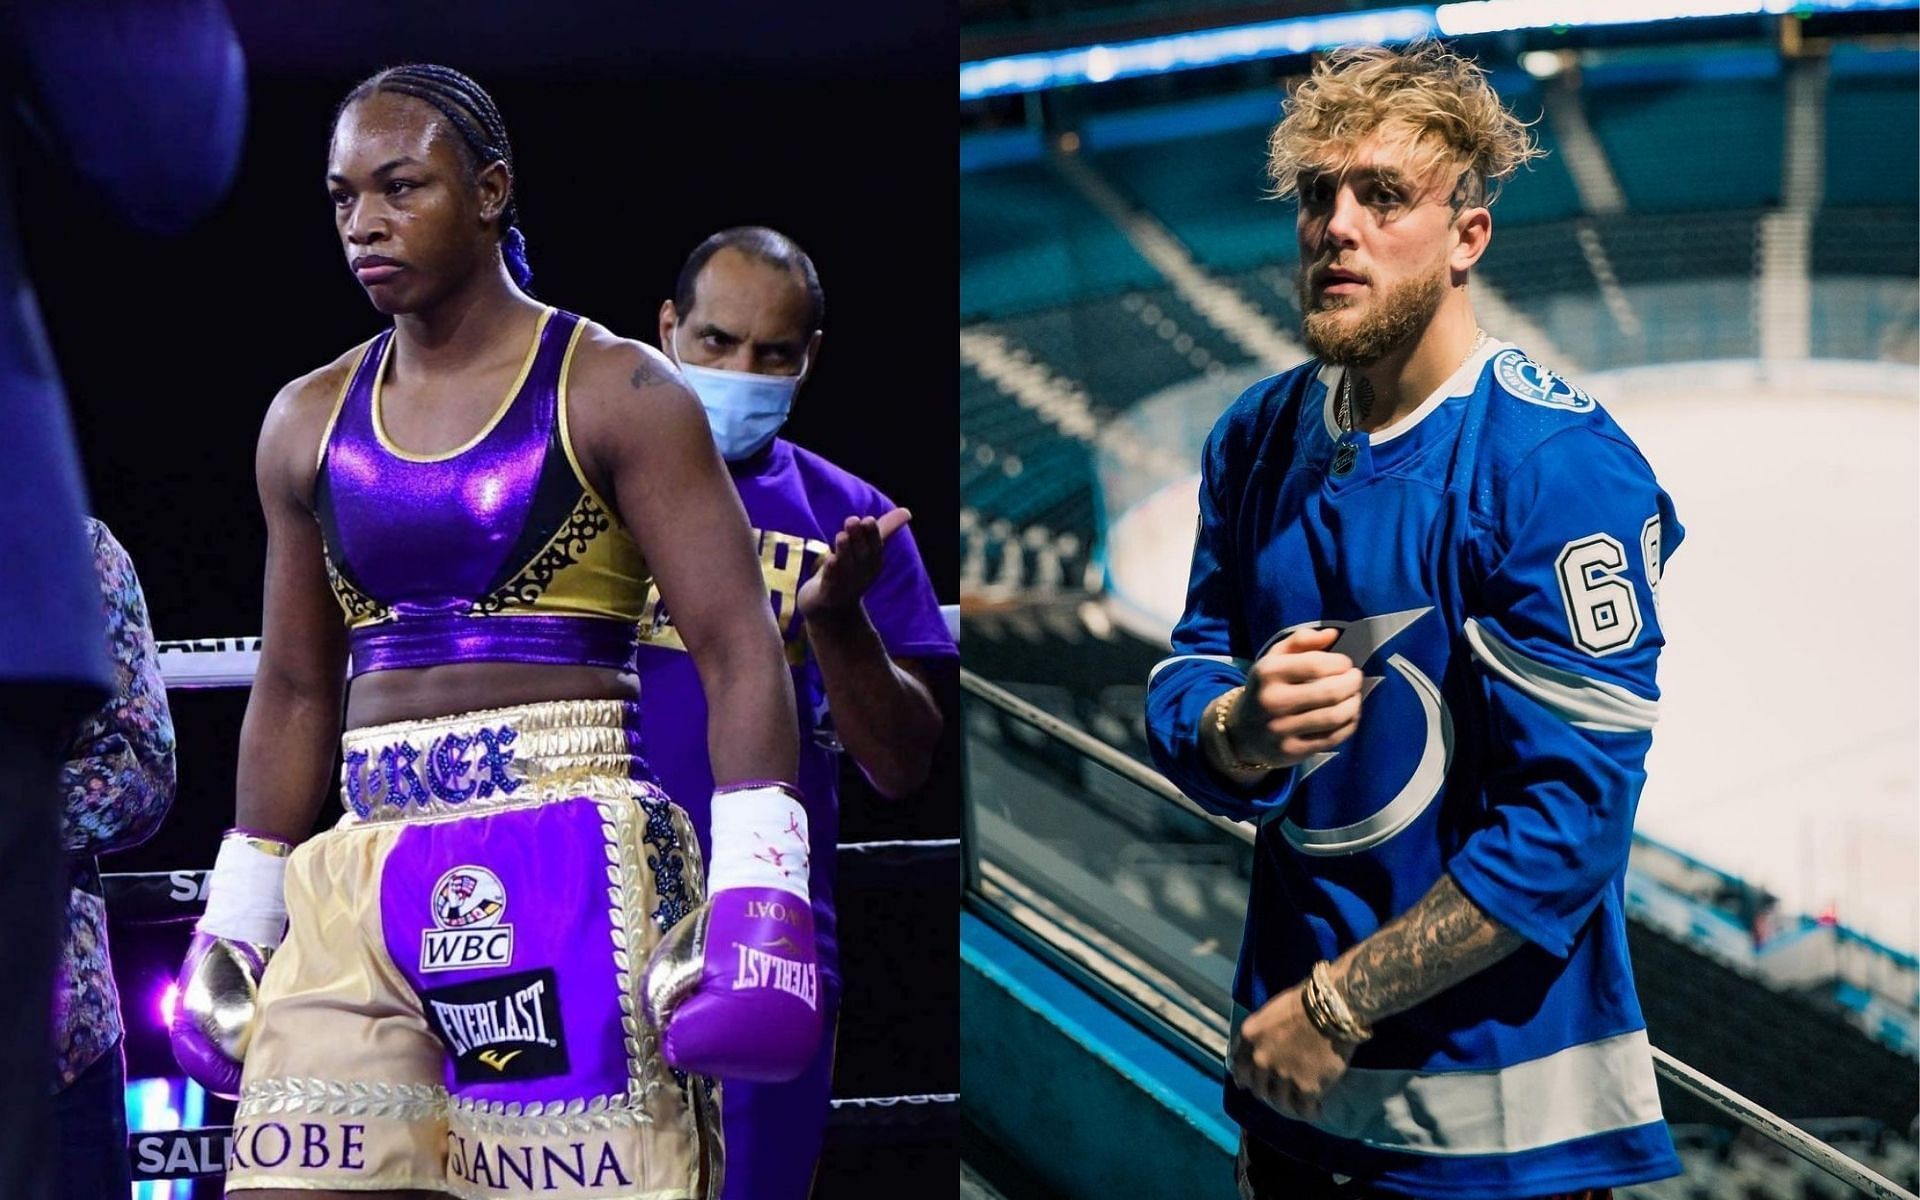 Claressa Shields (left) and Jake Paul (right) [Image Courtesy: @claressashields and @jakepaul on Instagram]